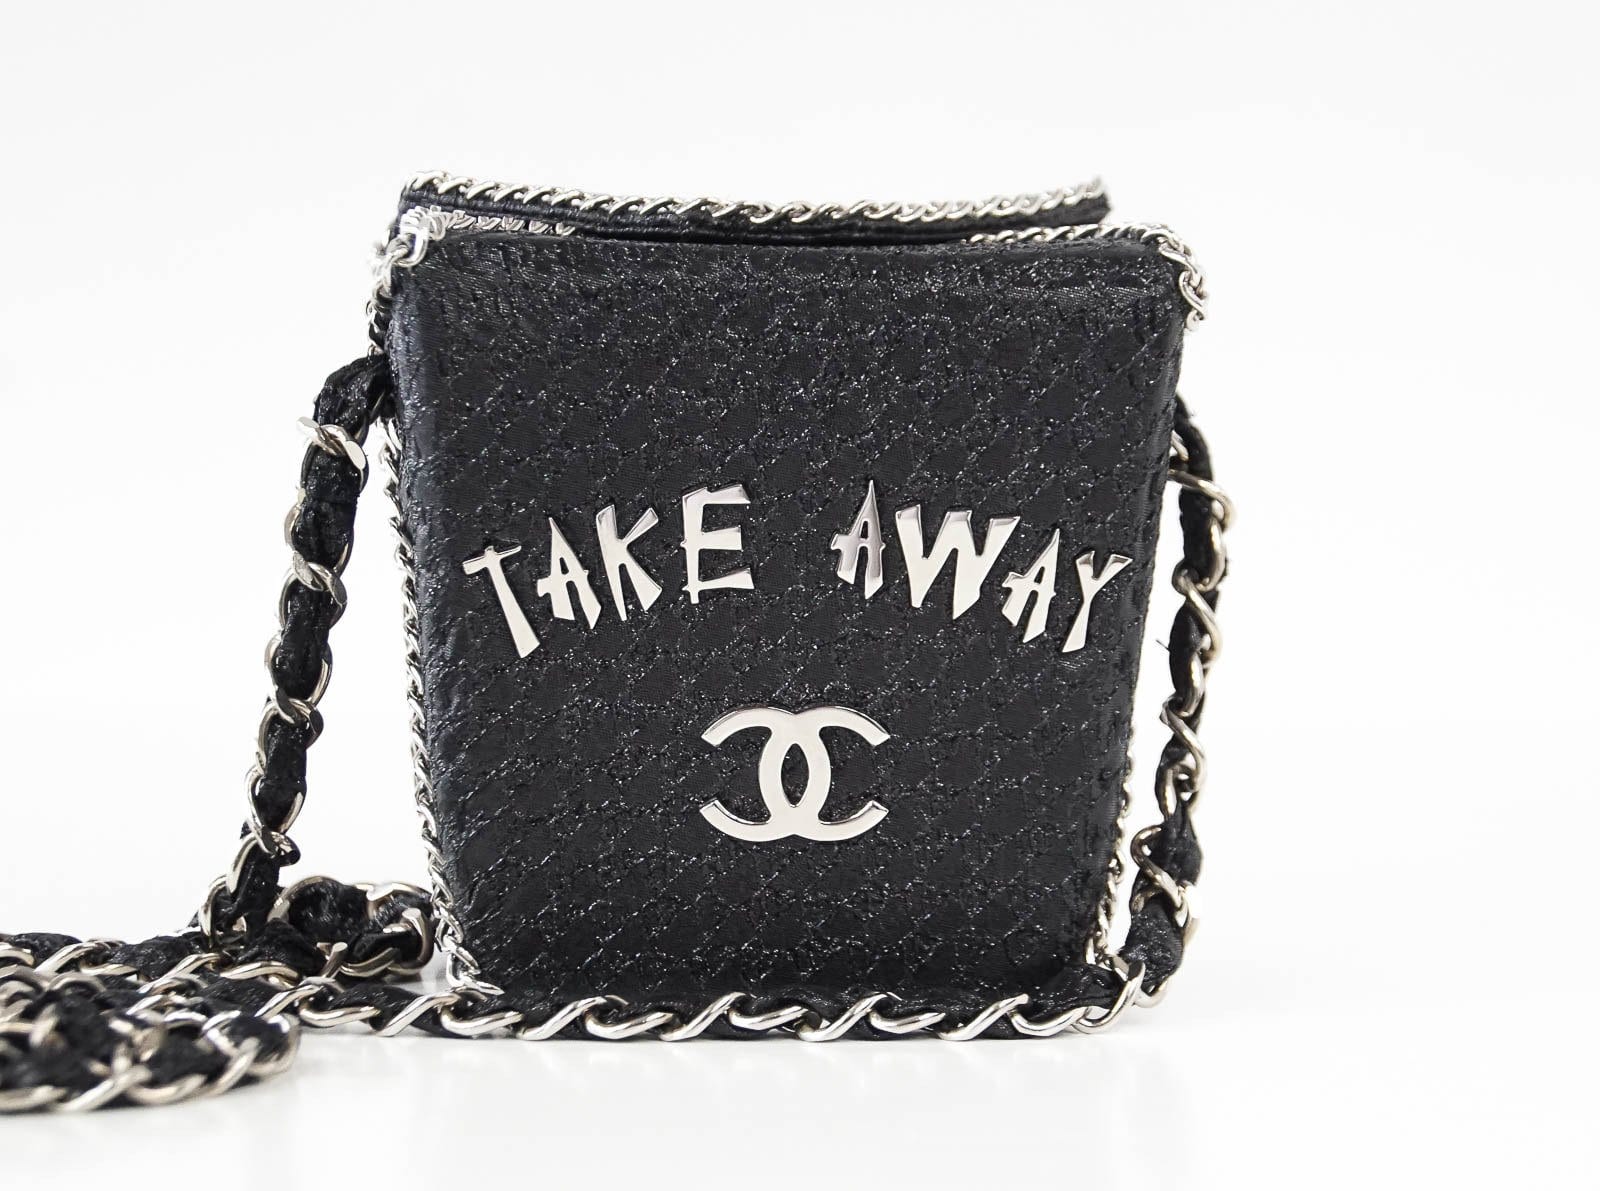 Chanel Two Tone Black and White Flap Bag Rare Limited Edition For